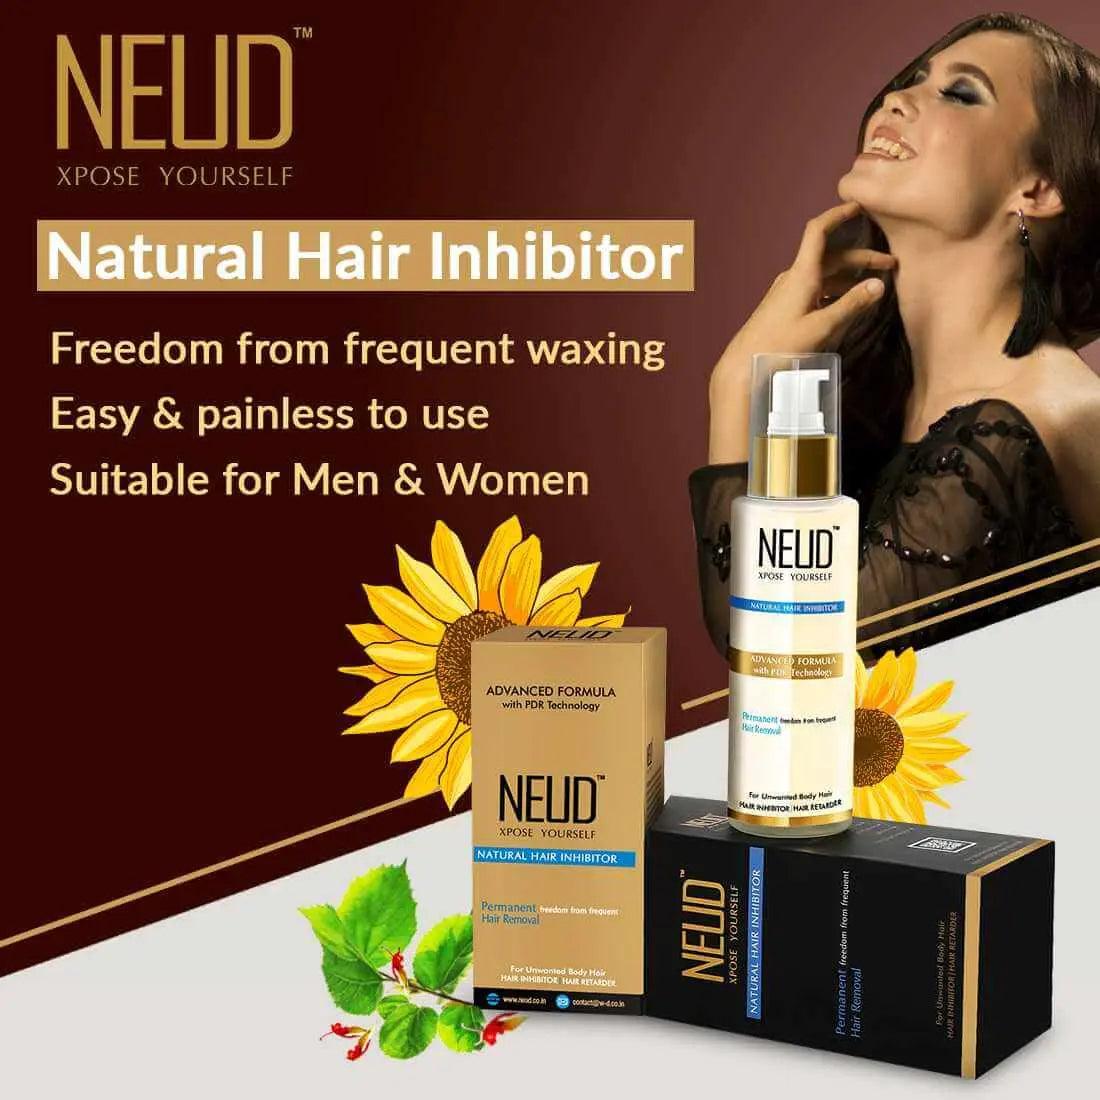 NEUD Ultimate Combo: Hair Inhibitor, Hair Remover Spray and After-Hair-Removal Skin Lotion for Men & Women 8903540011883